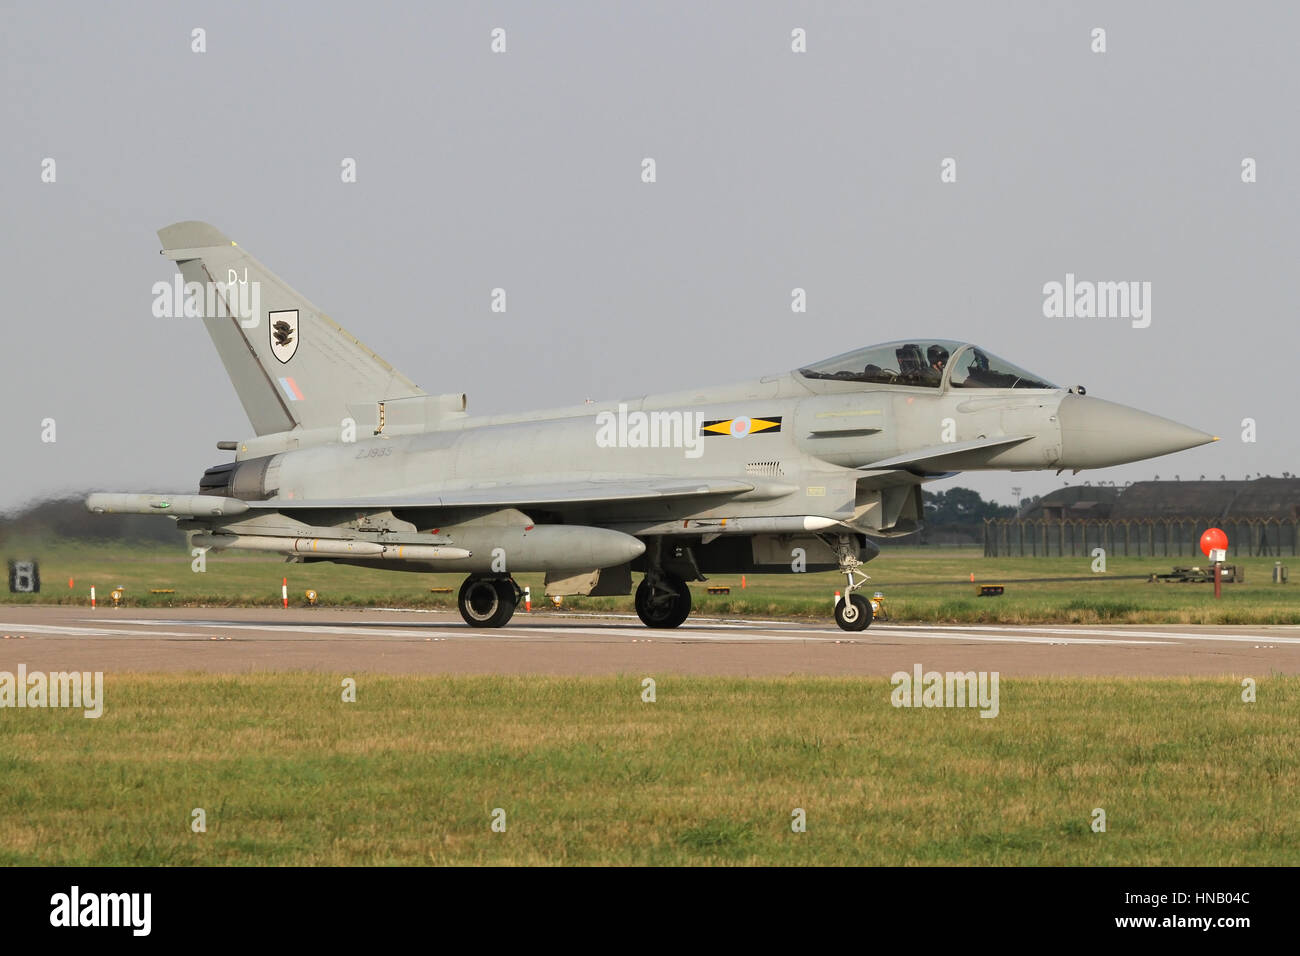 Royal Air Force Typhoon landing after a Quick Reaction Alert (QRA) practise scramble. As usual, the aircraft was loaded with live rounds. Stock Photo